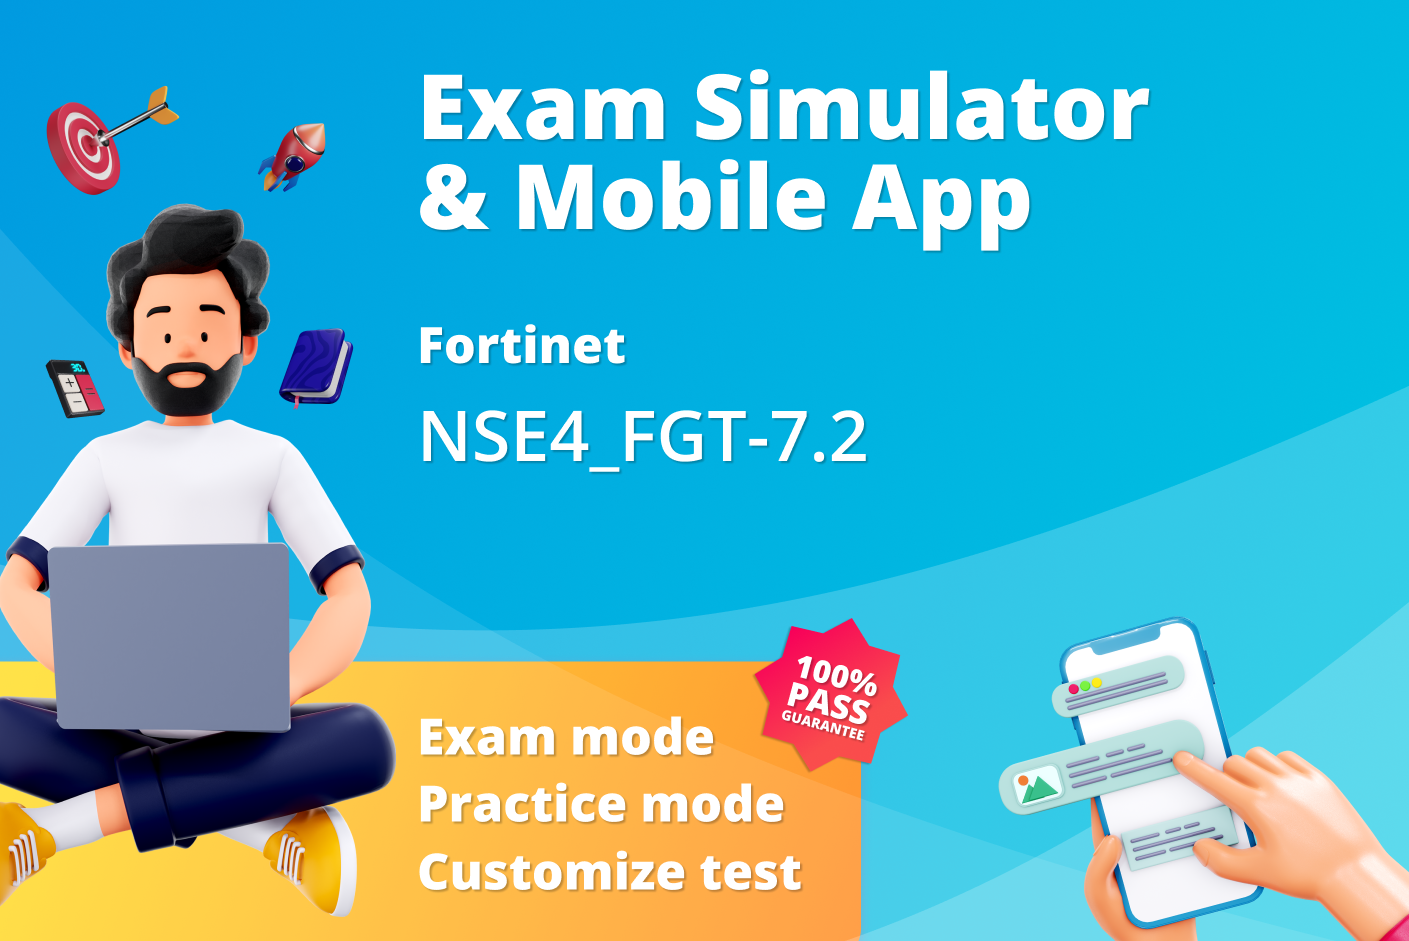 Prepare for your Fortinet NSE4_FGT-7.2 certification with our Fortinet NSE4_FGT-7.2 mock exams